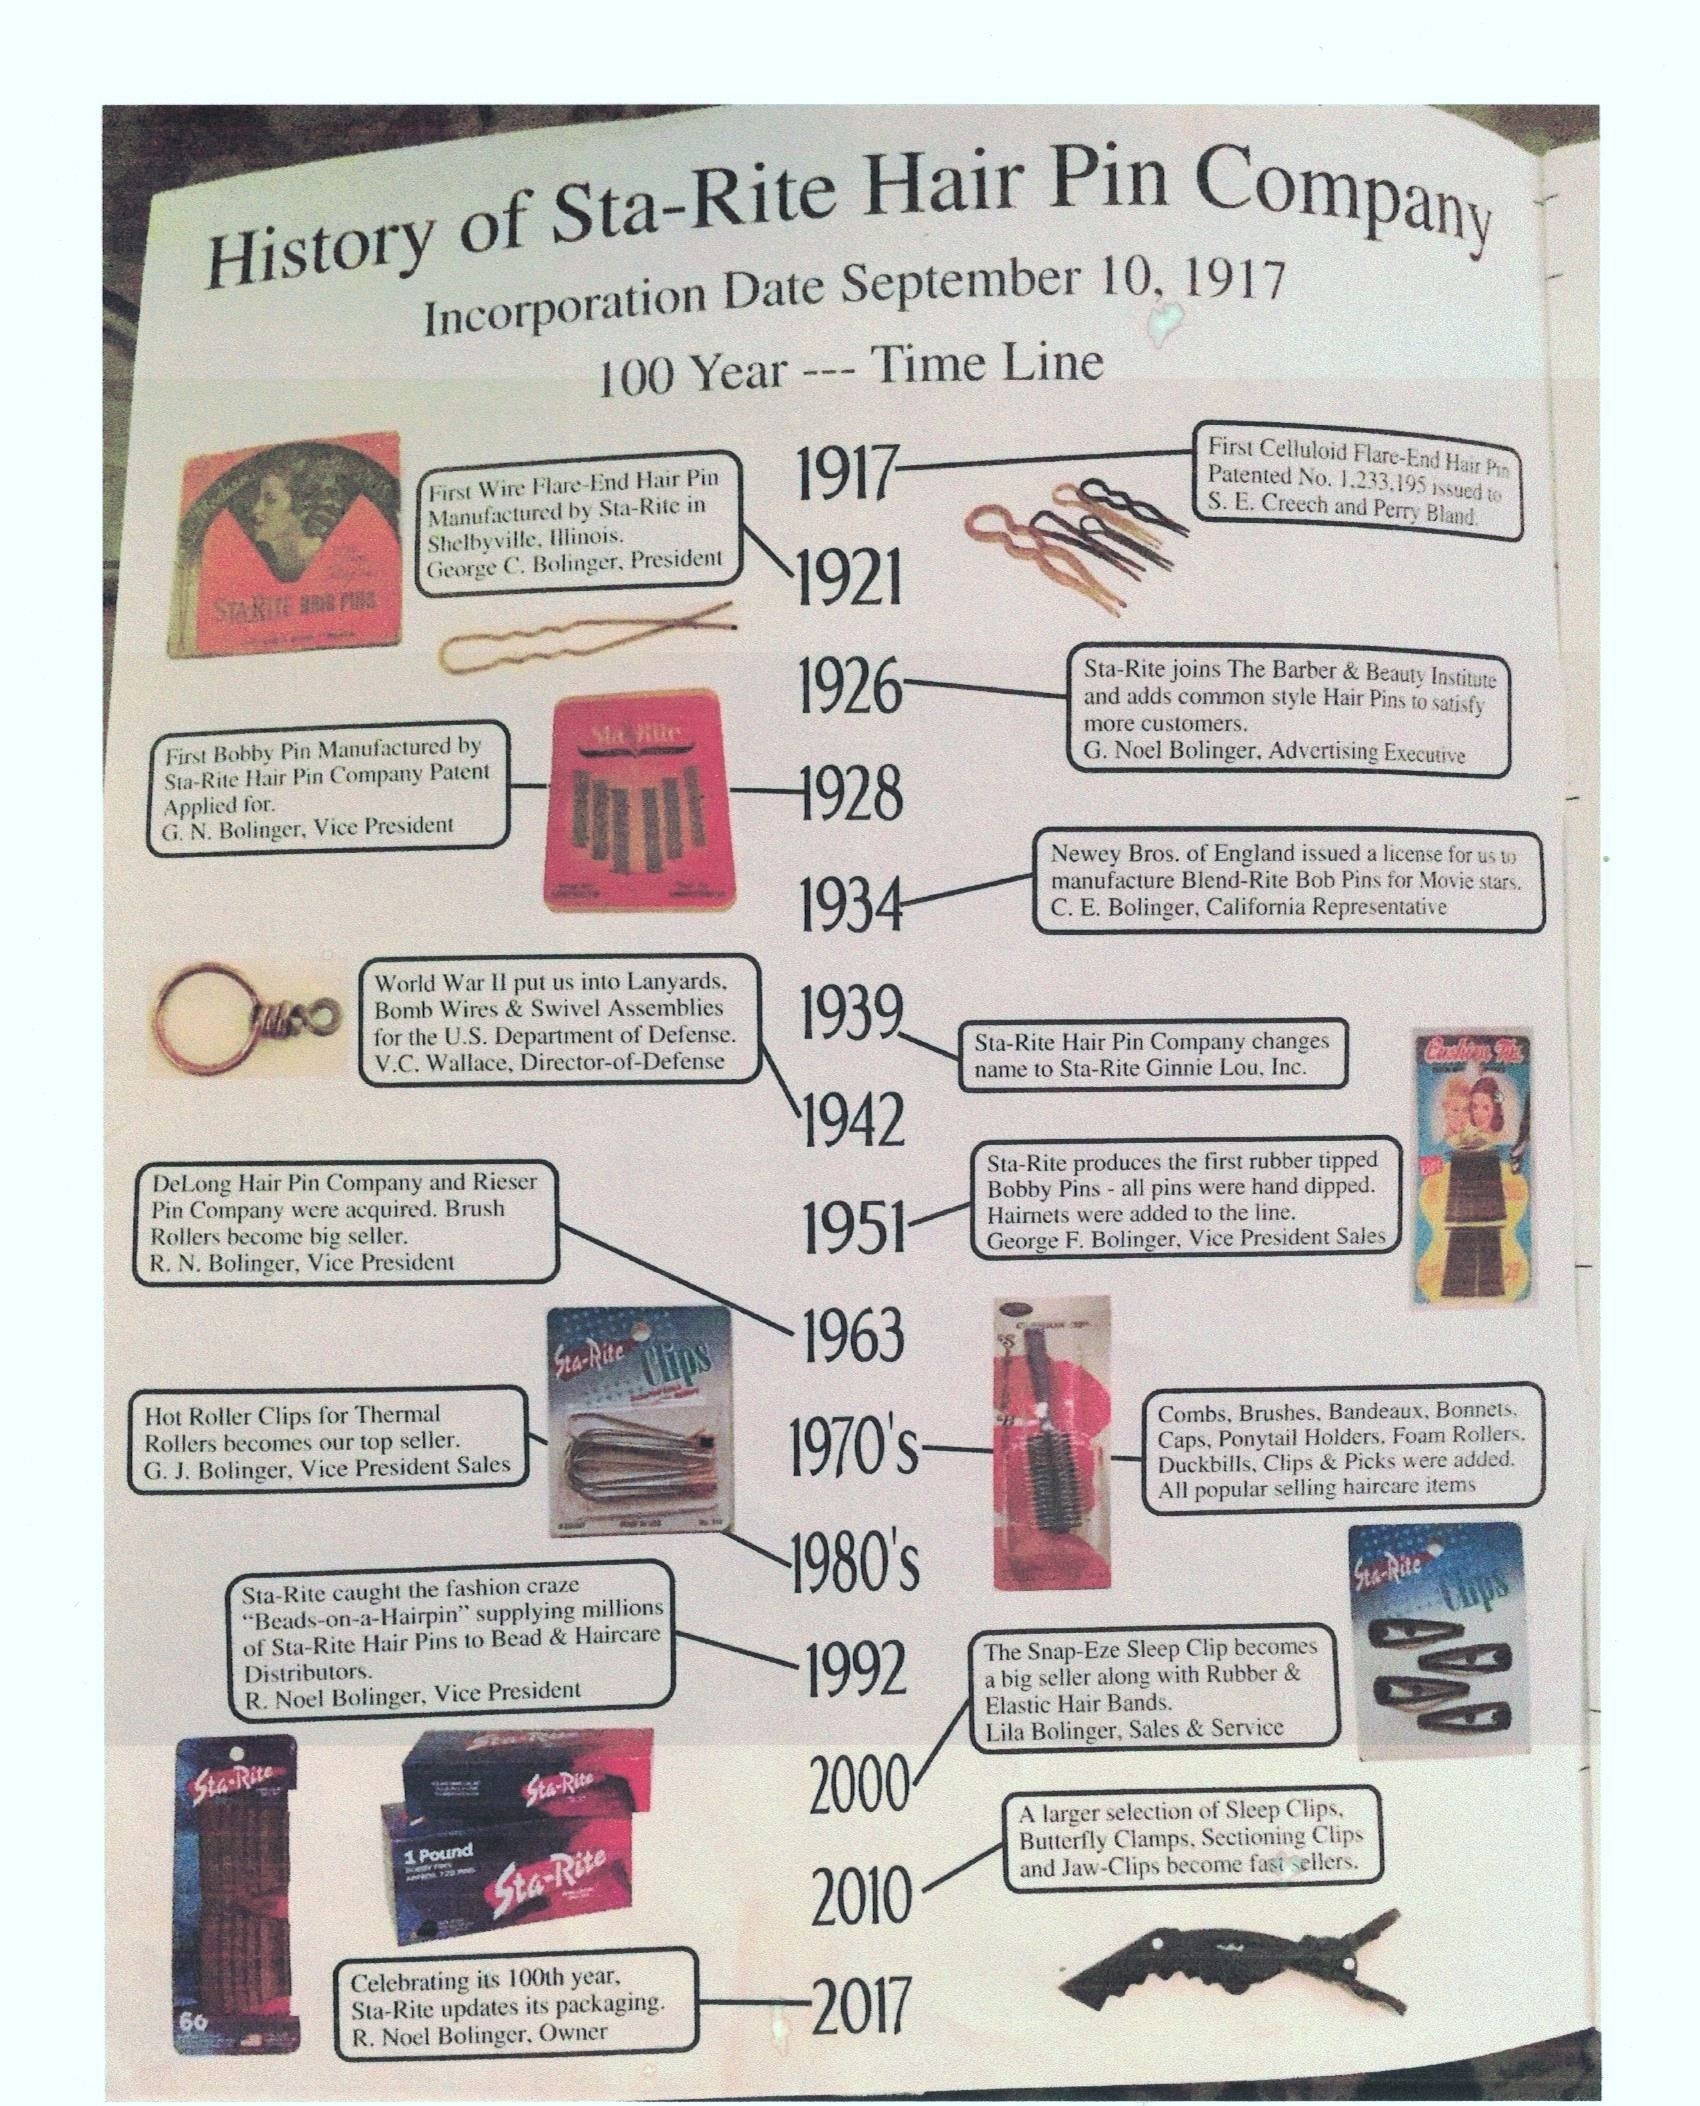 Photograph of a timeline of Sta-Rite Hair Pin Company's history.